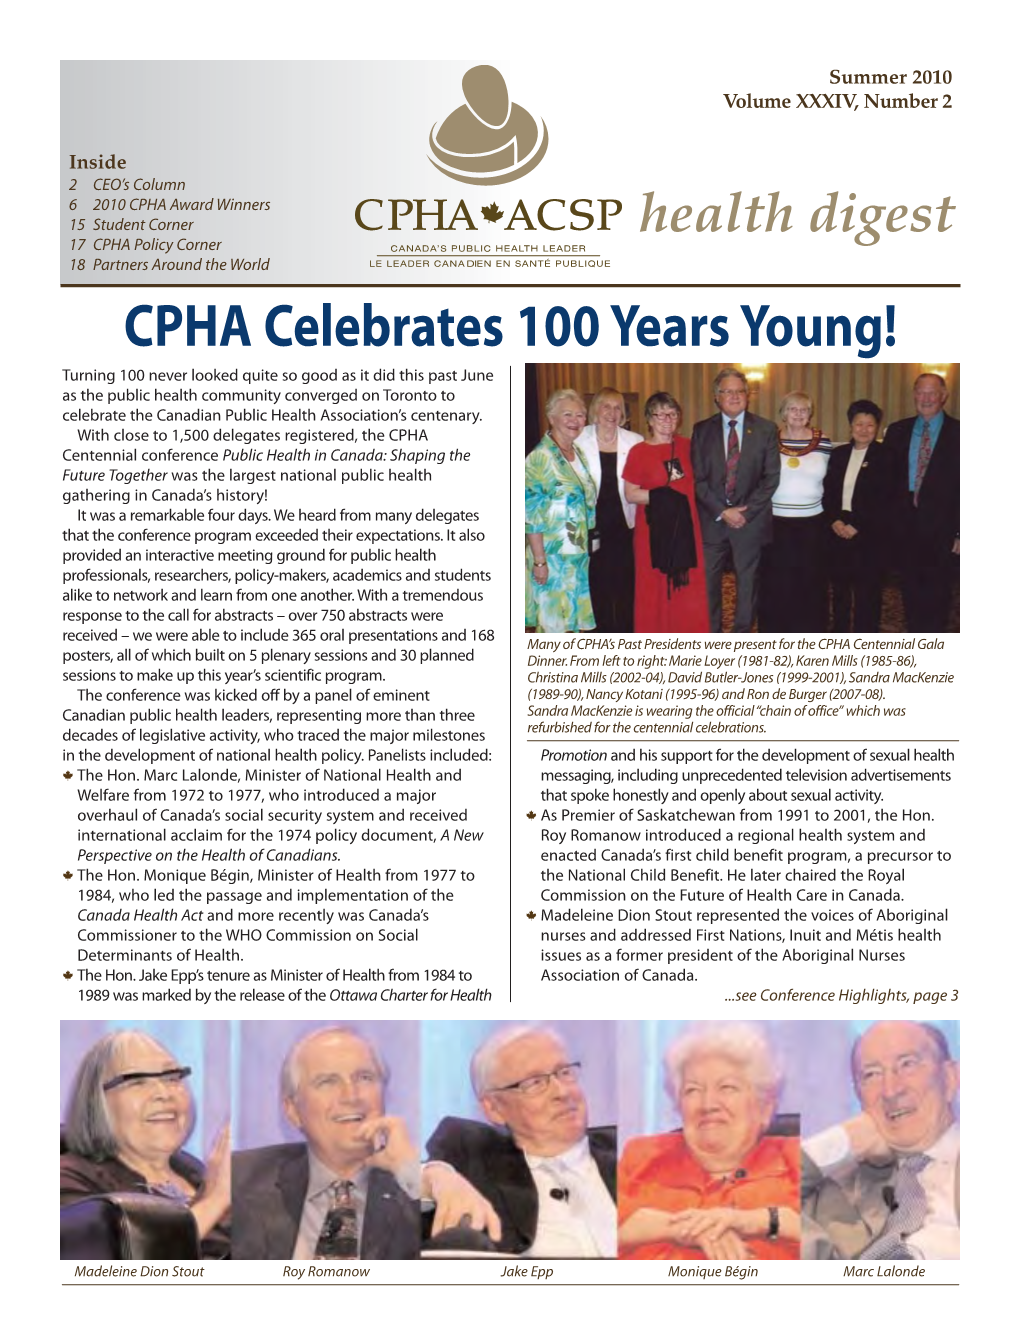 Read More About the Book and CPHA Centenary Conference